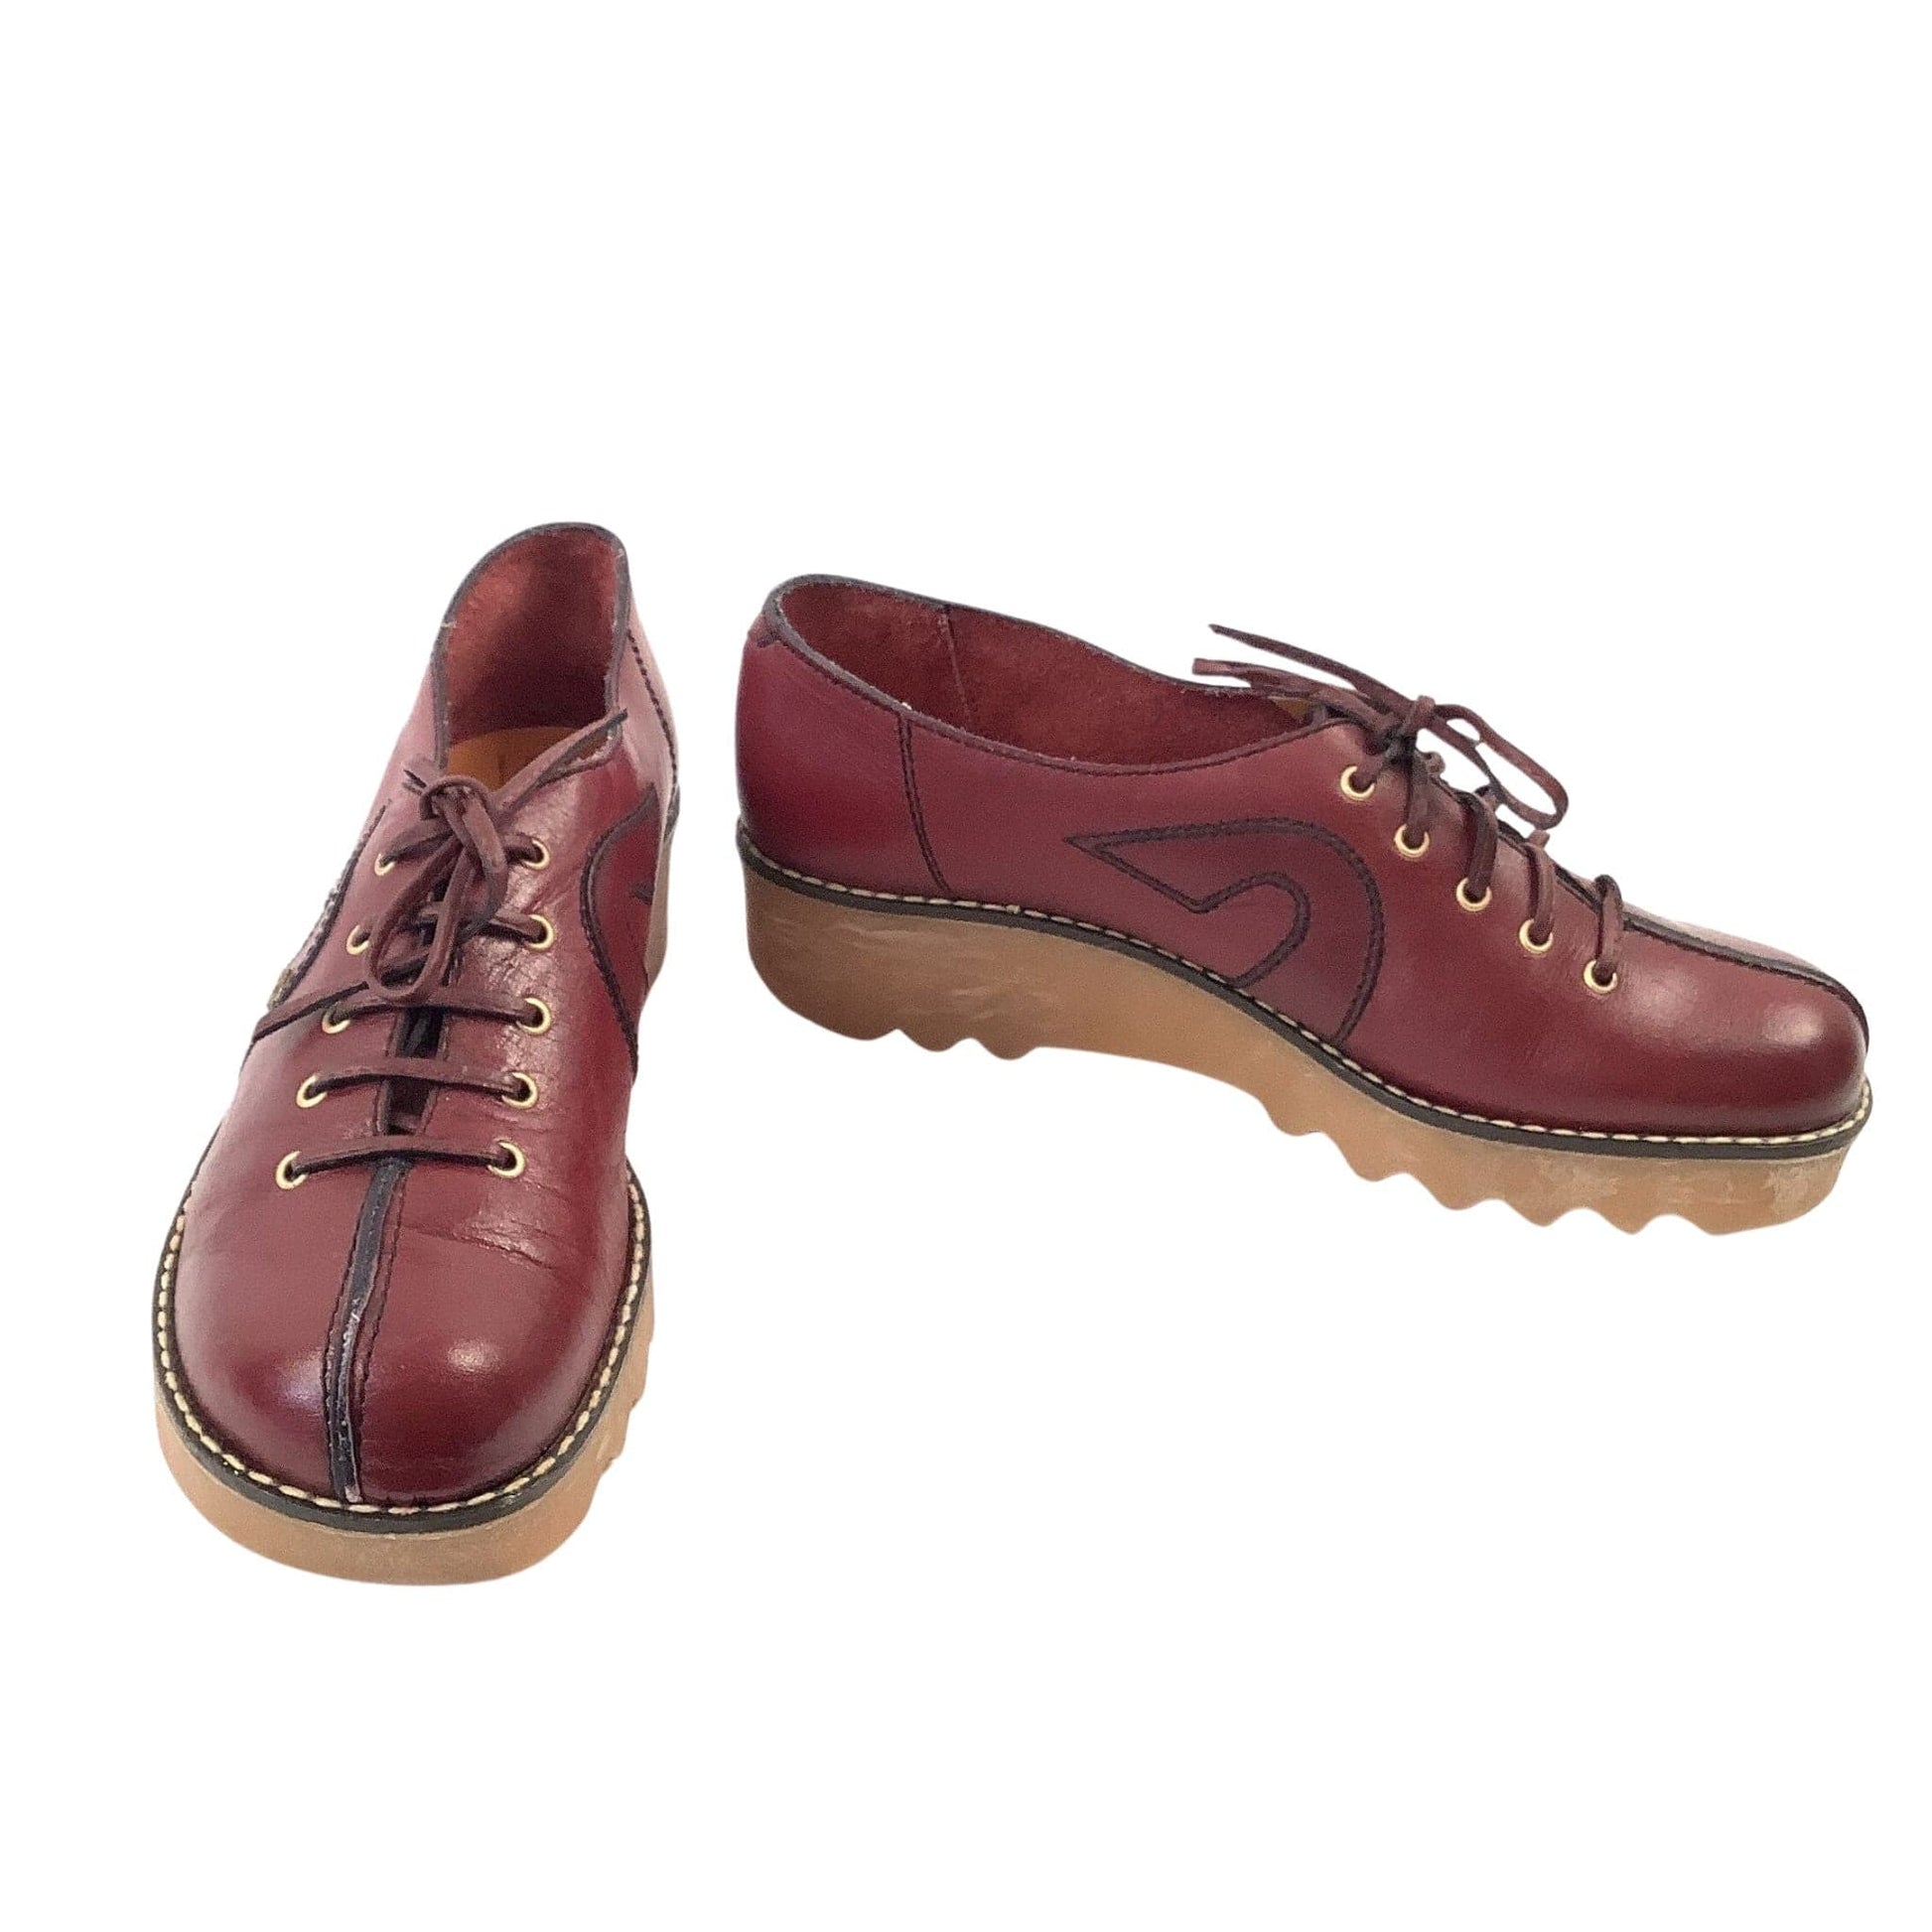 Aigner Bowling Style Shoes 9 / Burgundy / Vintage 1970s